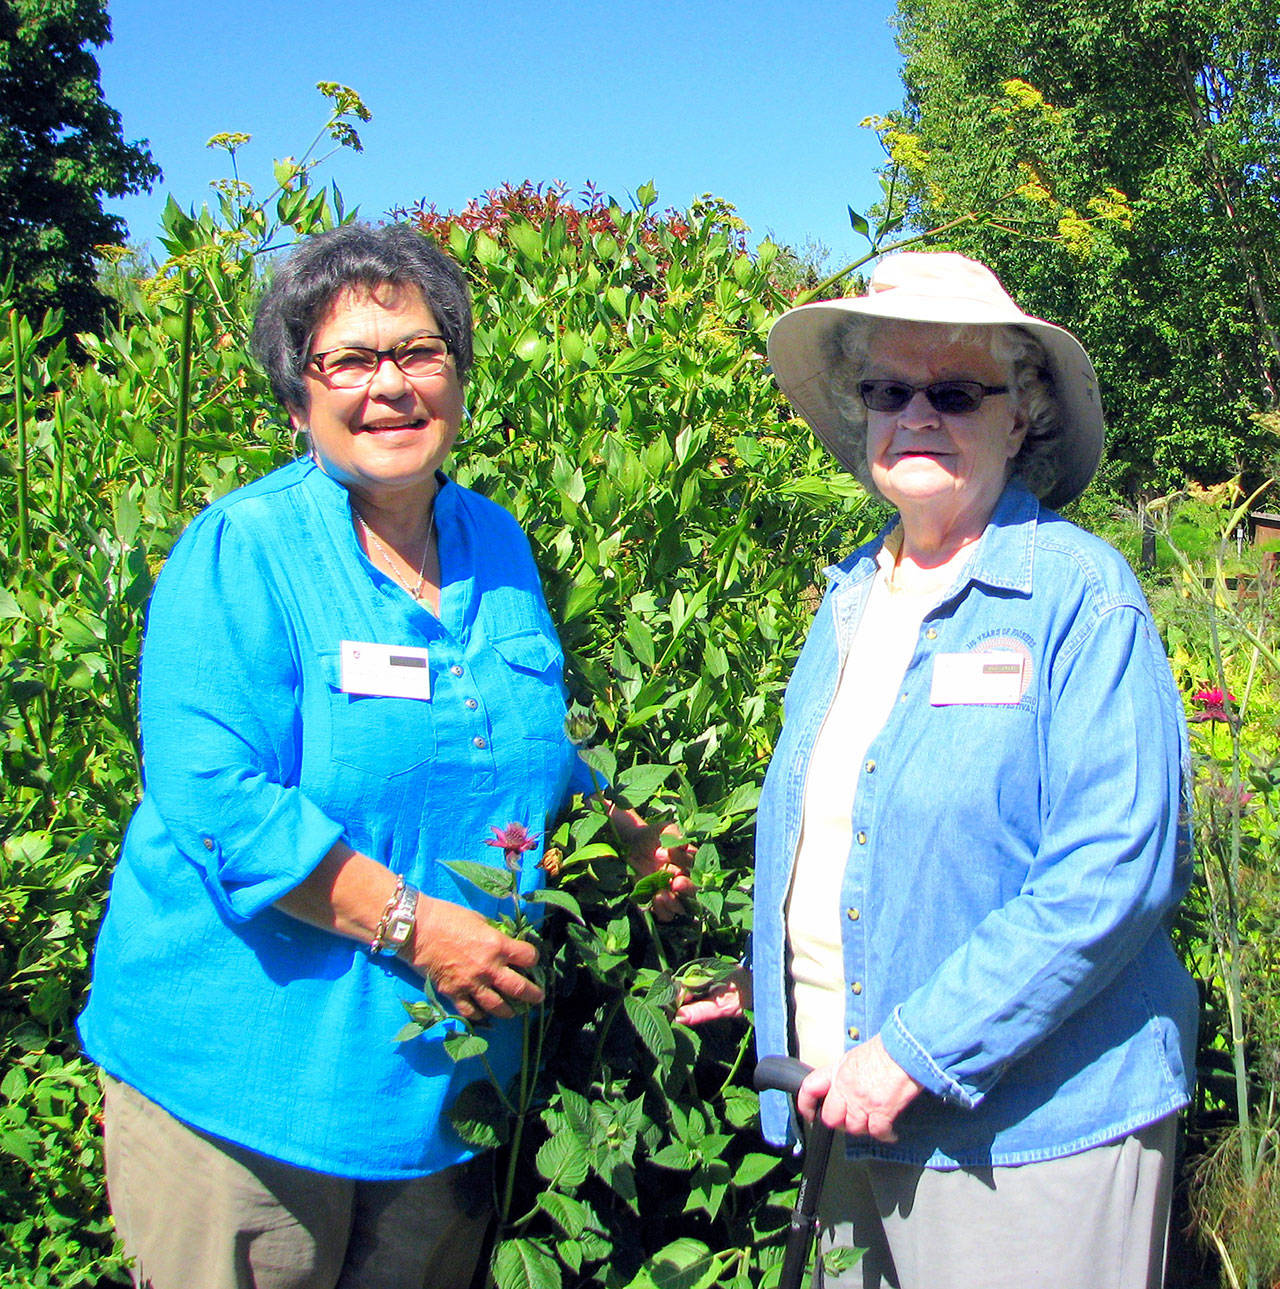 Sally Tysver, class of 1991 — the longest serving Clallam County Master Gardener — is pictured with fellow Master Gardener, Barbara Heckard, left, class of 2013. Tysver celebrates 30 years of service this year.